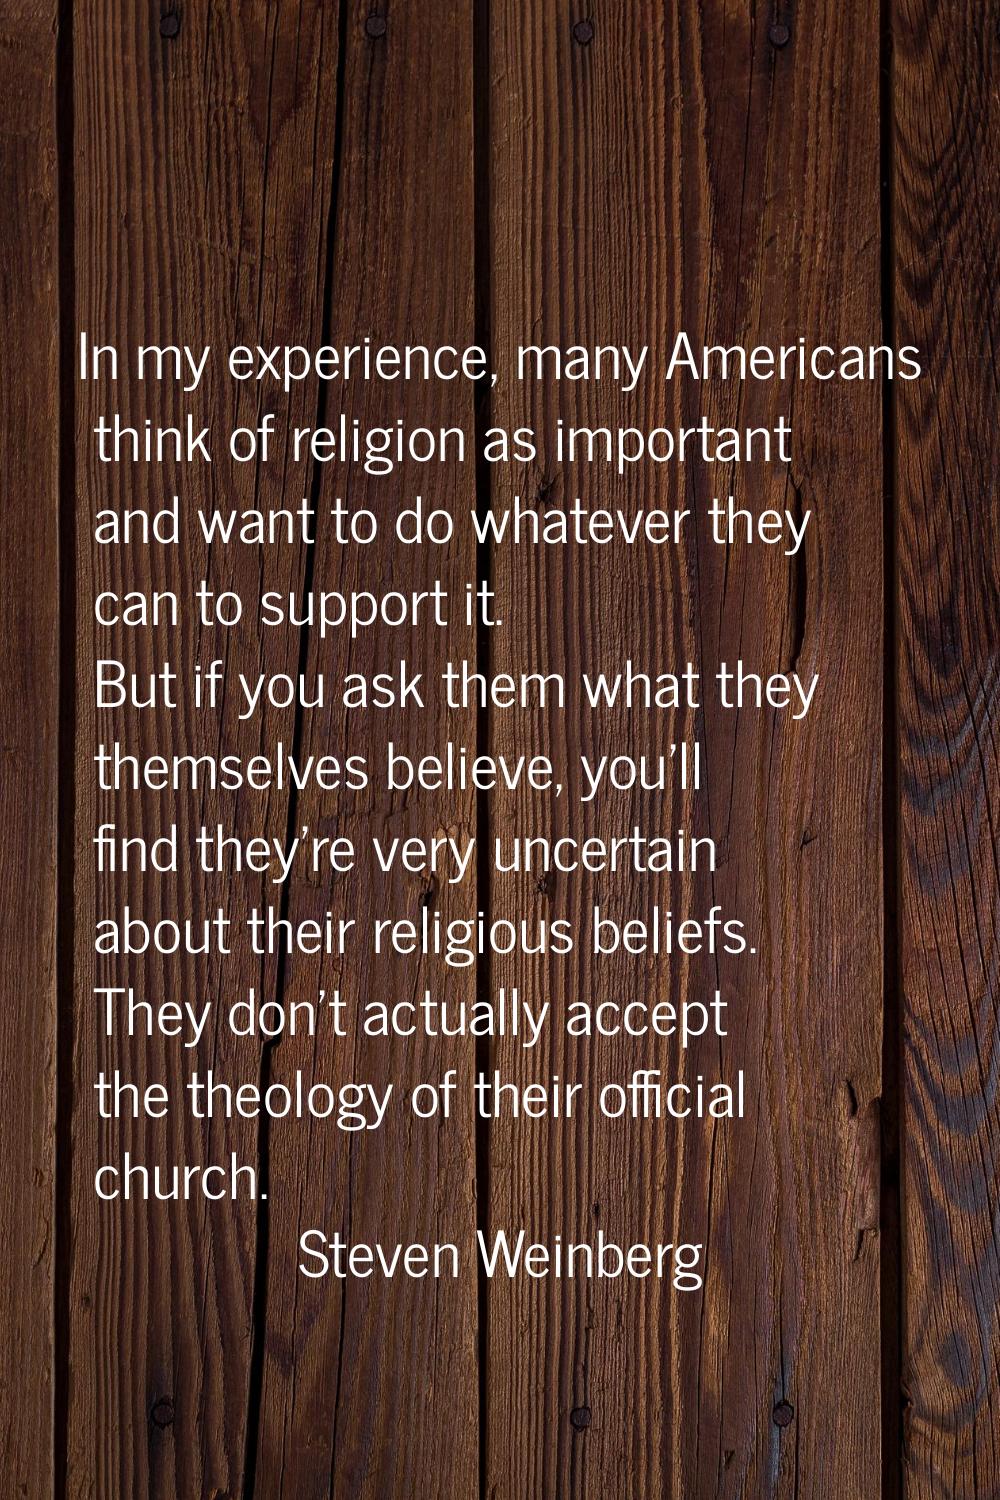 In my experience, many Americans think of religion as important and want to do whatever they can to